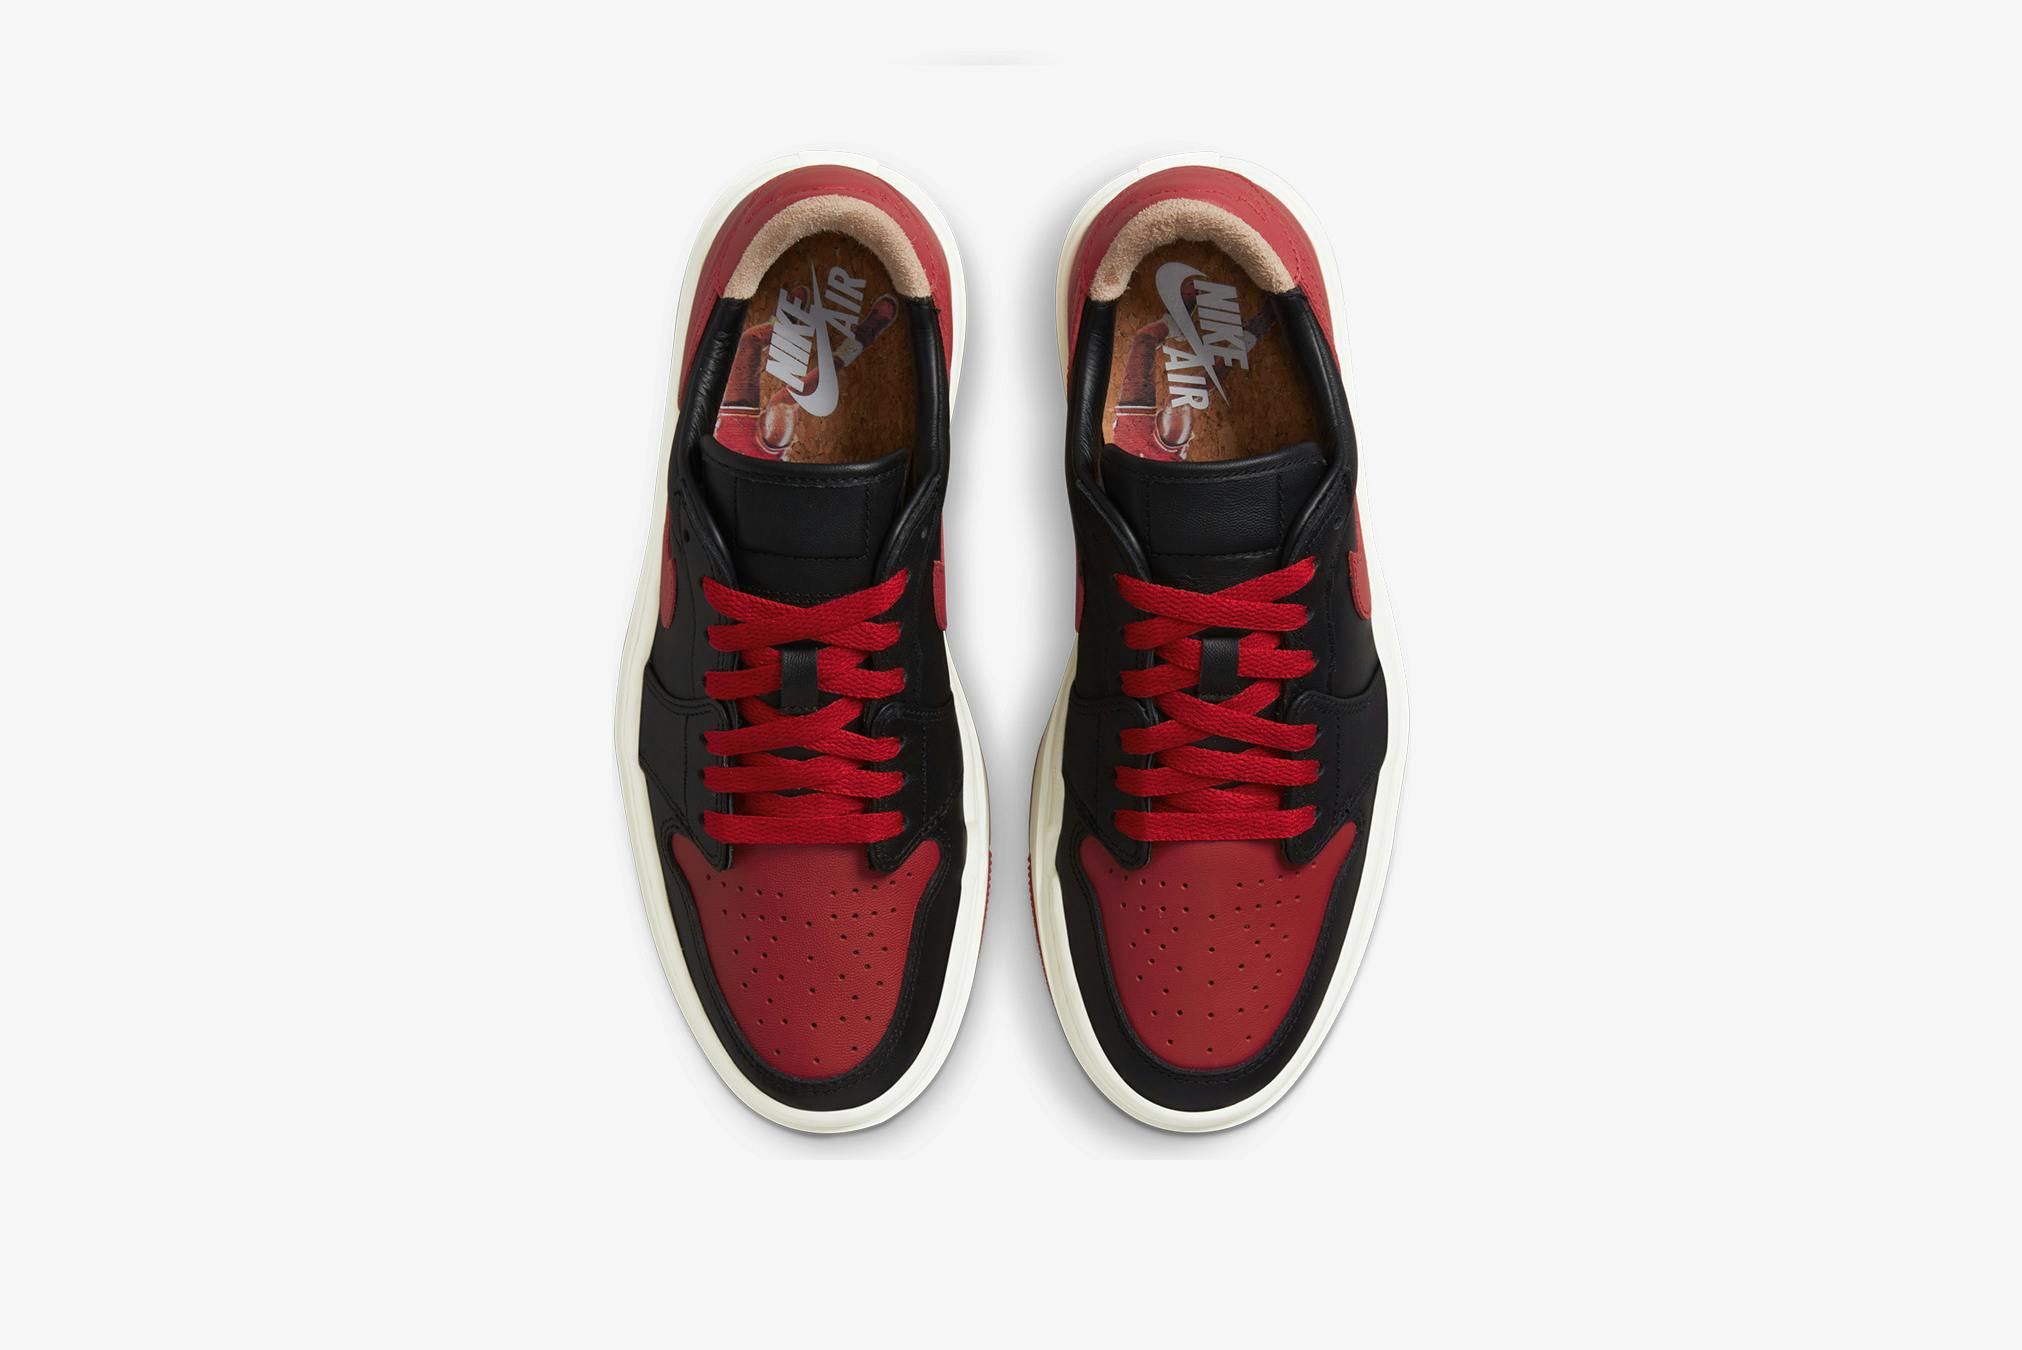 Jordan 1 LV8D Elevated Bred 2022 W for sale